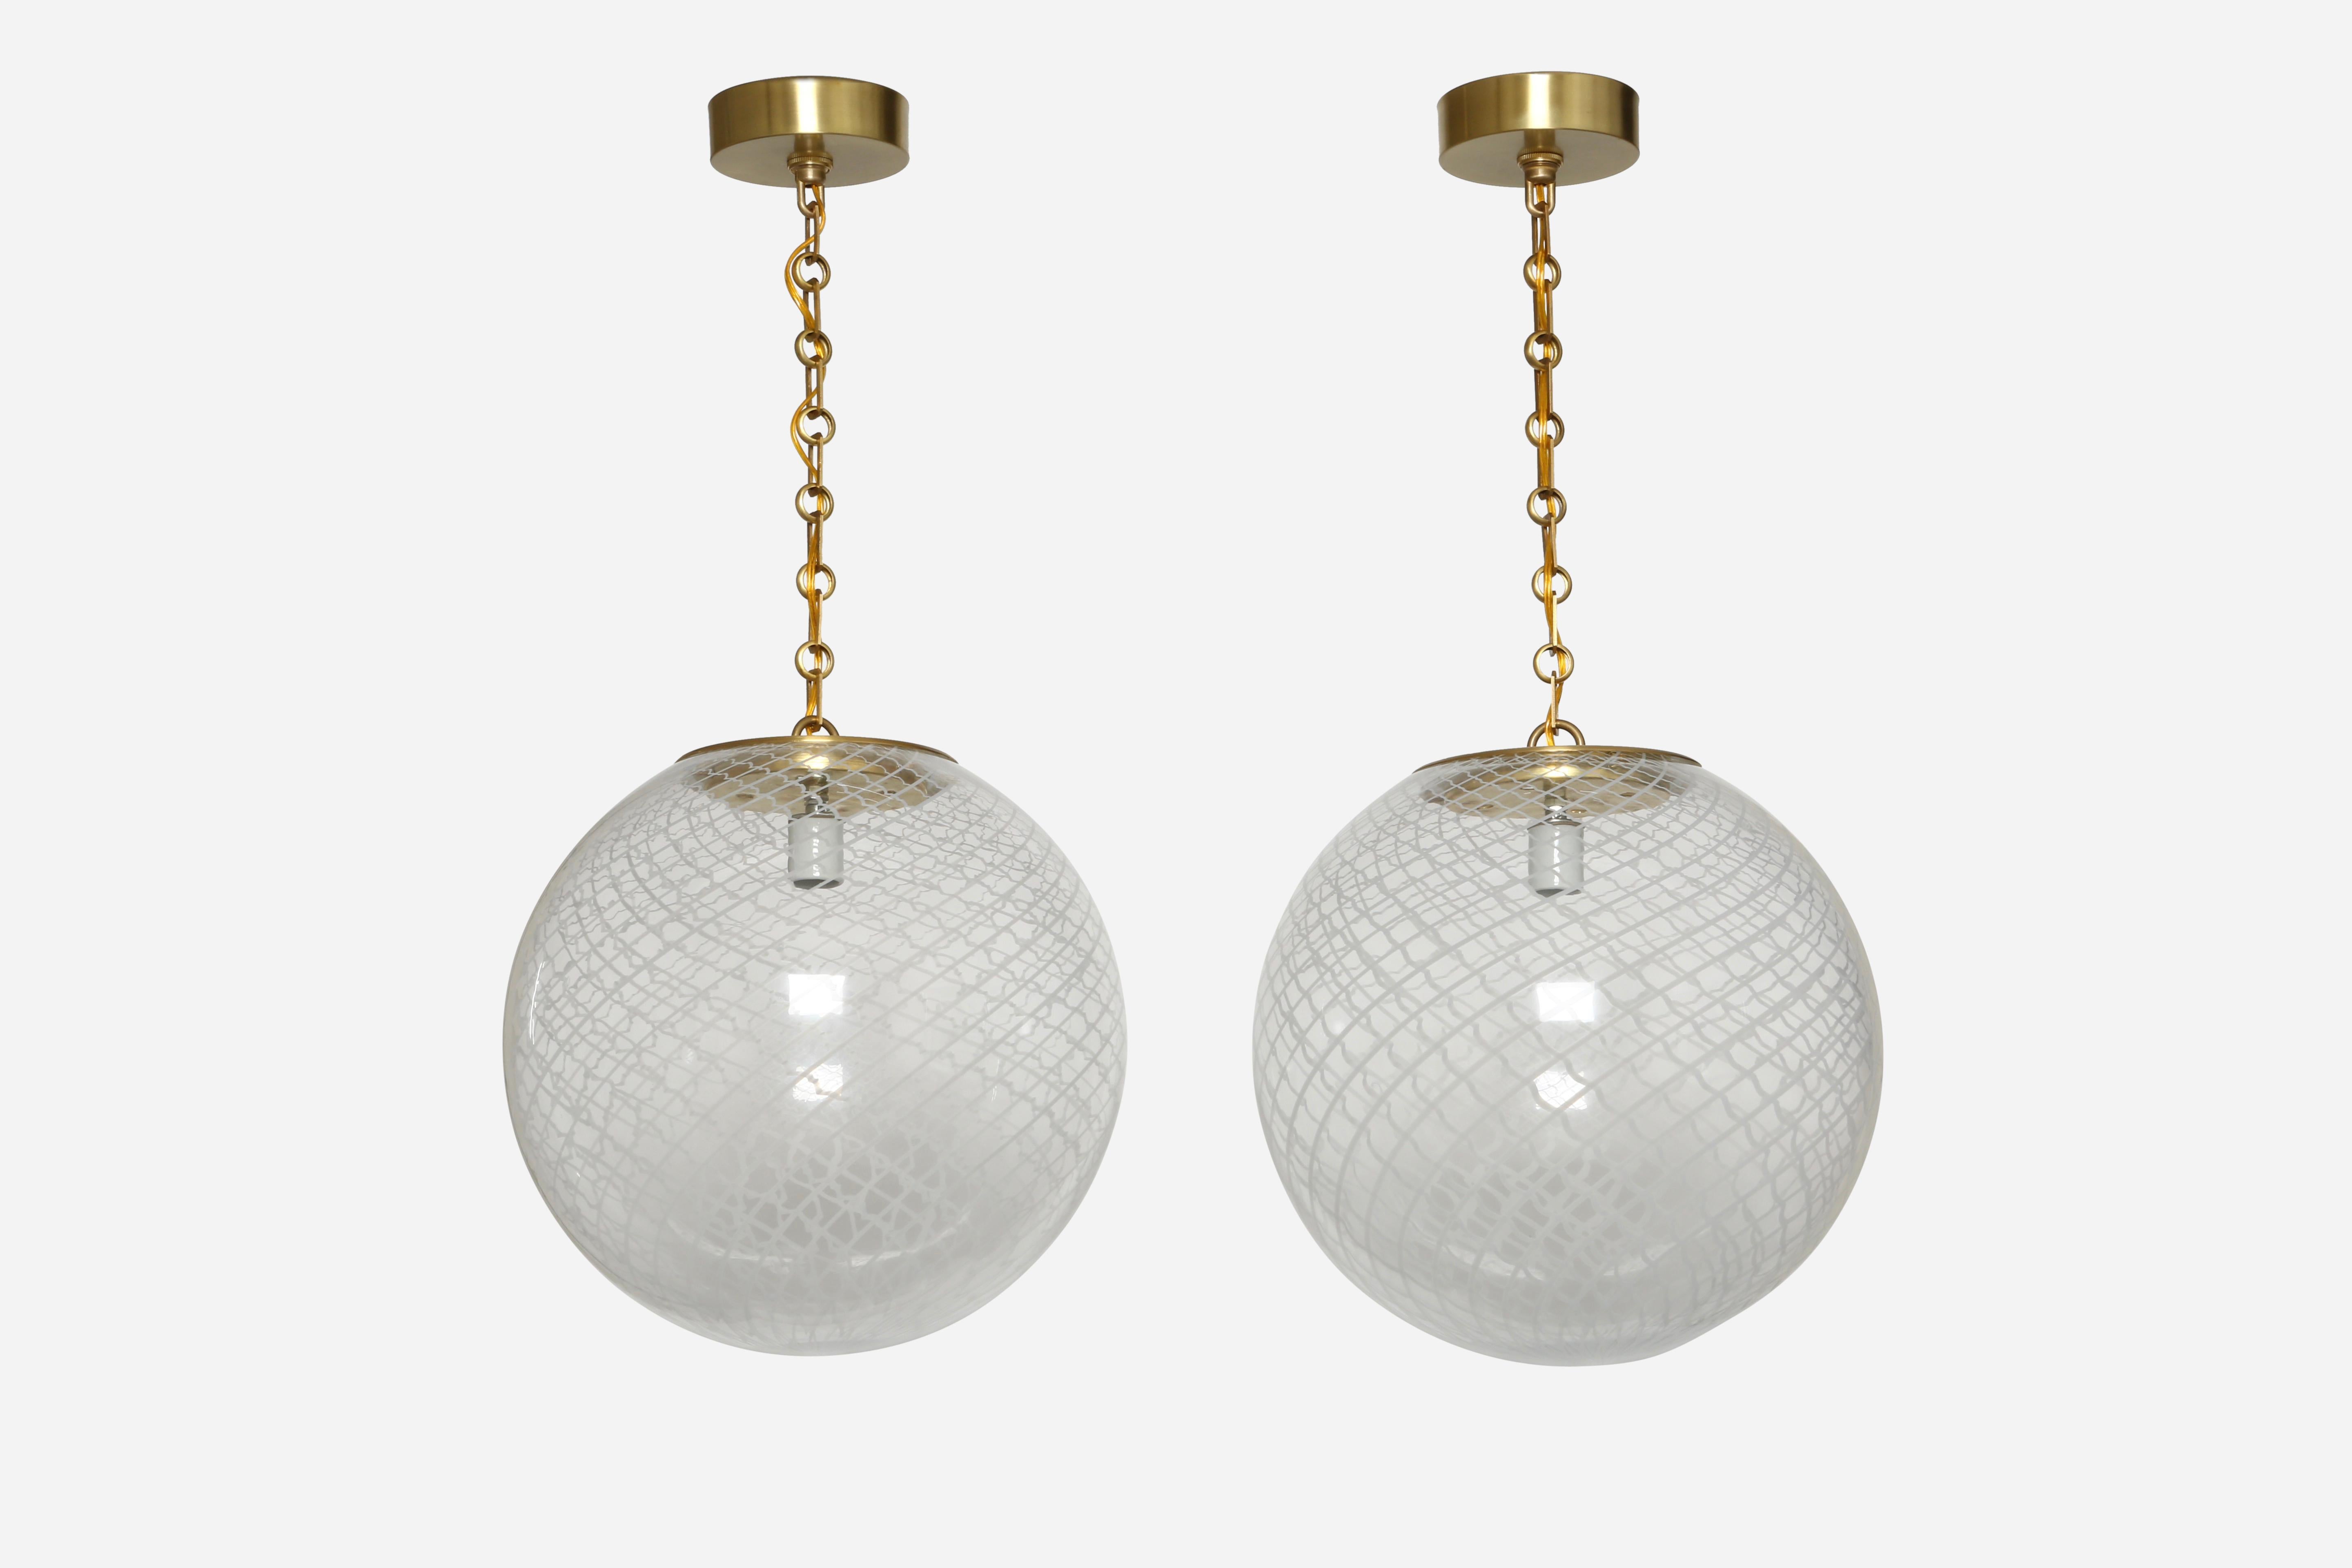 Murano glass ceiling pendants, a pair.
Made in Italy, 2021 exclusively for Illustris.
Murano glass, hand finished brass hardware.
Rewired for US.
Overall drop is adjustable.

We take pride in bringing vintage fixtures to their full glory again.
At